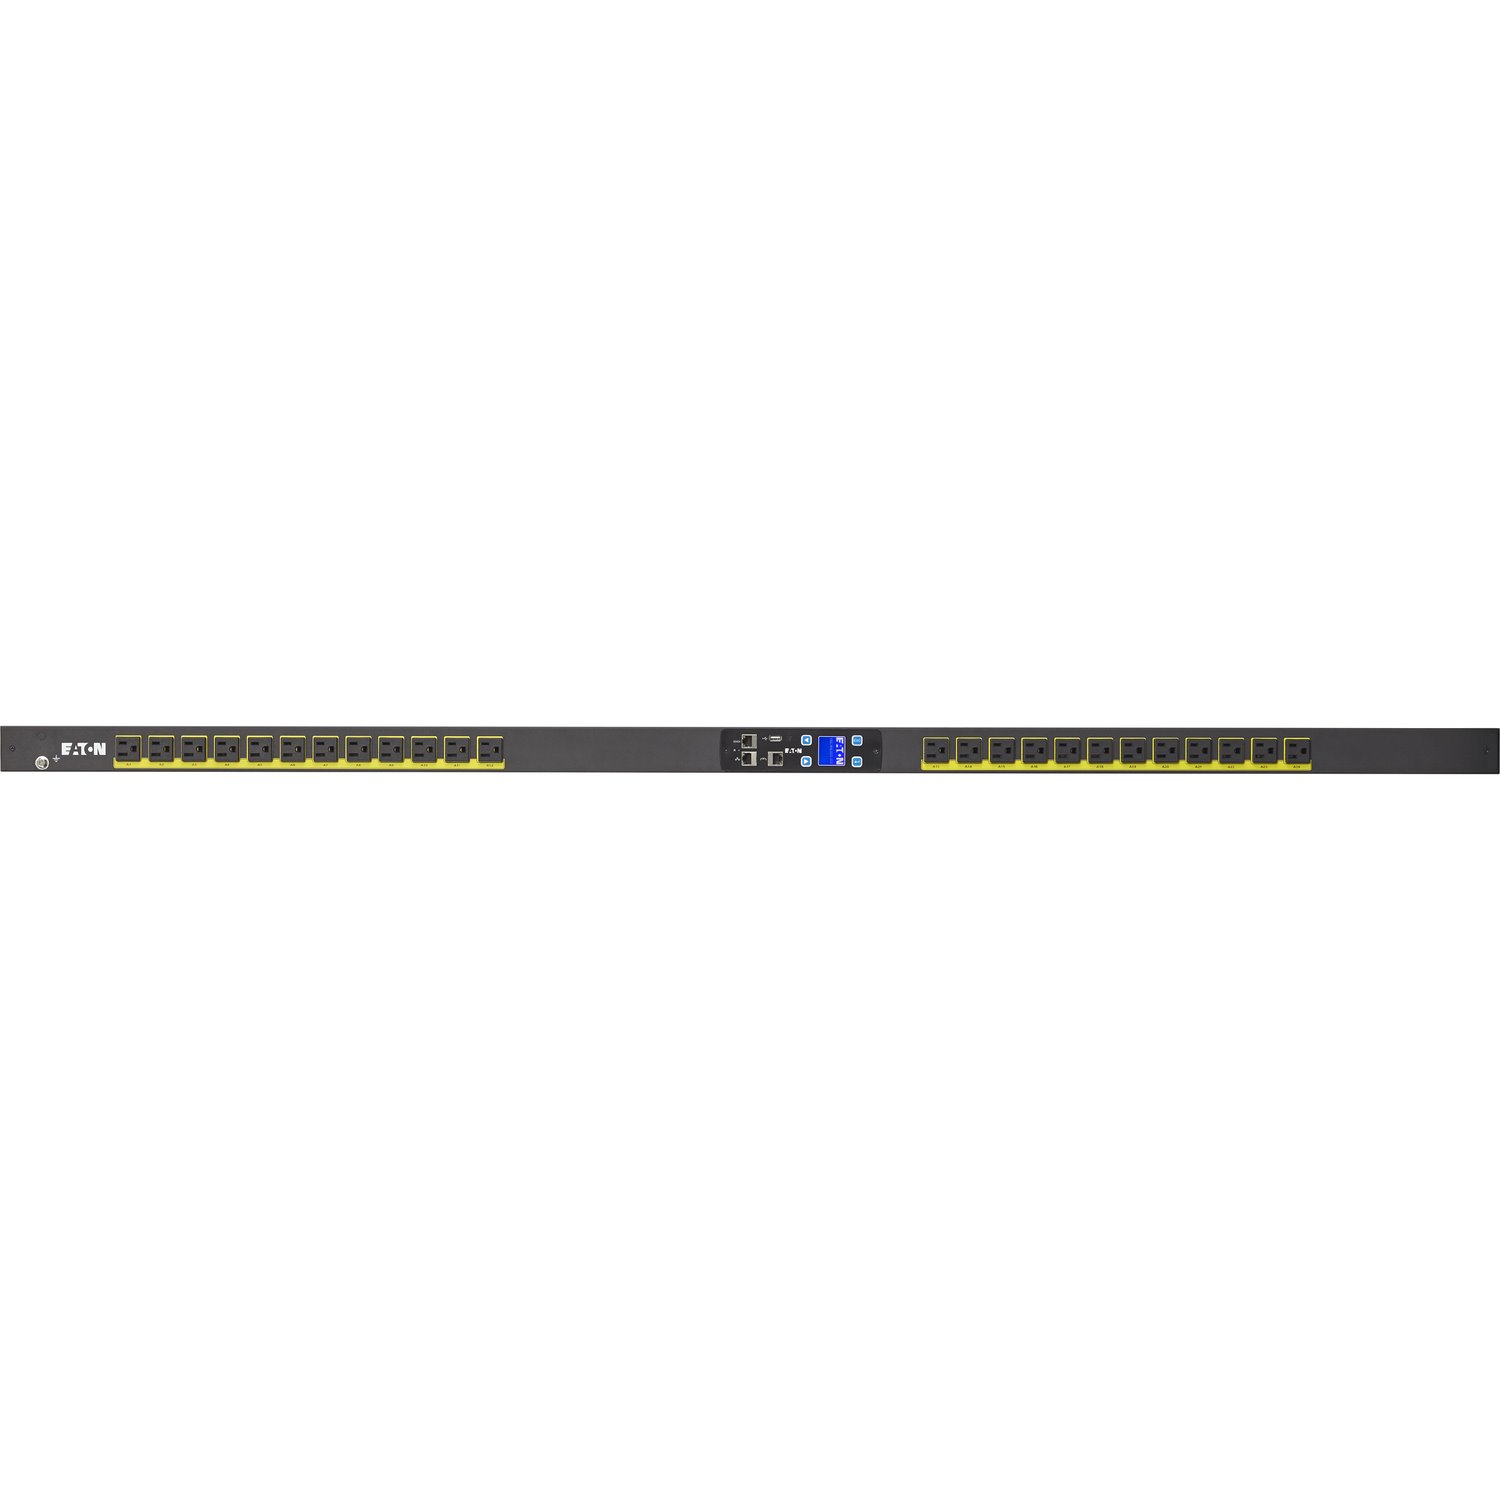 Eaton Metered Input rack PDU, 0U, 5-15P input, 1.44 kW max, 120V, 12A, 10 ft cord, Single-phase, Outlets: (24) 5-15R